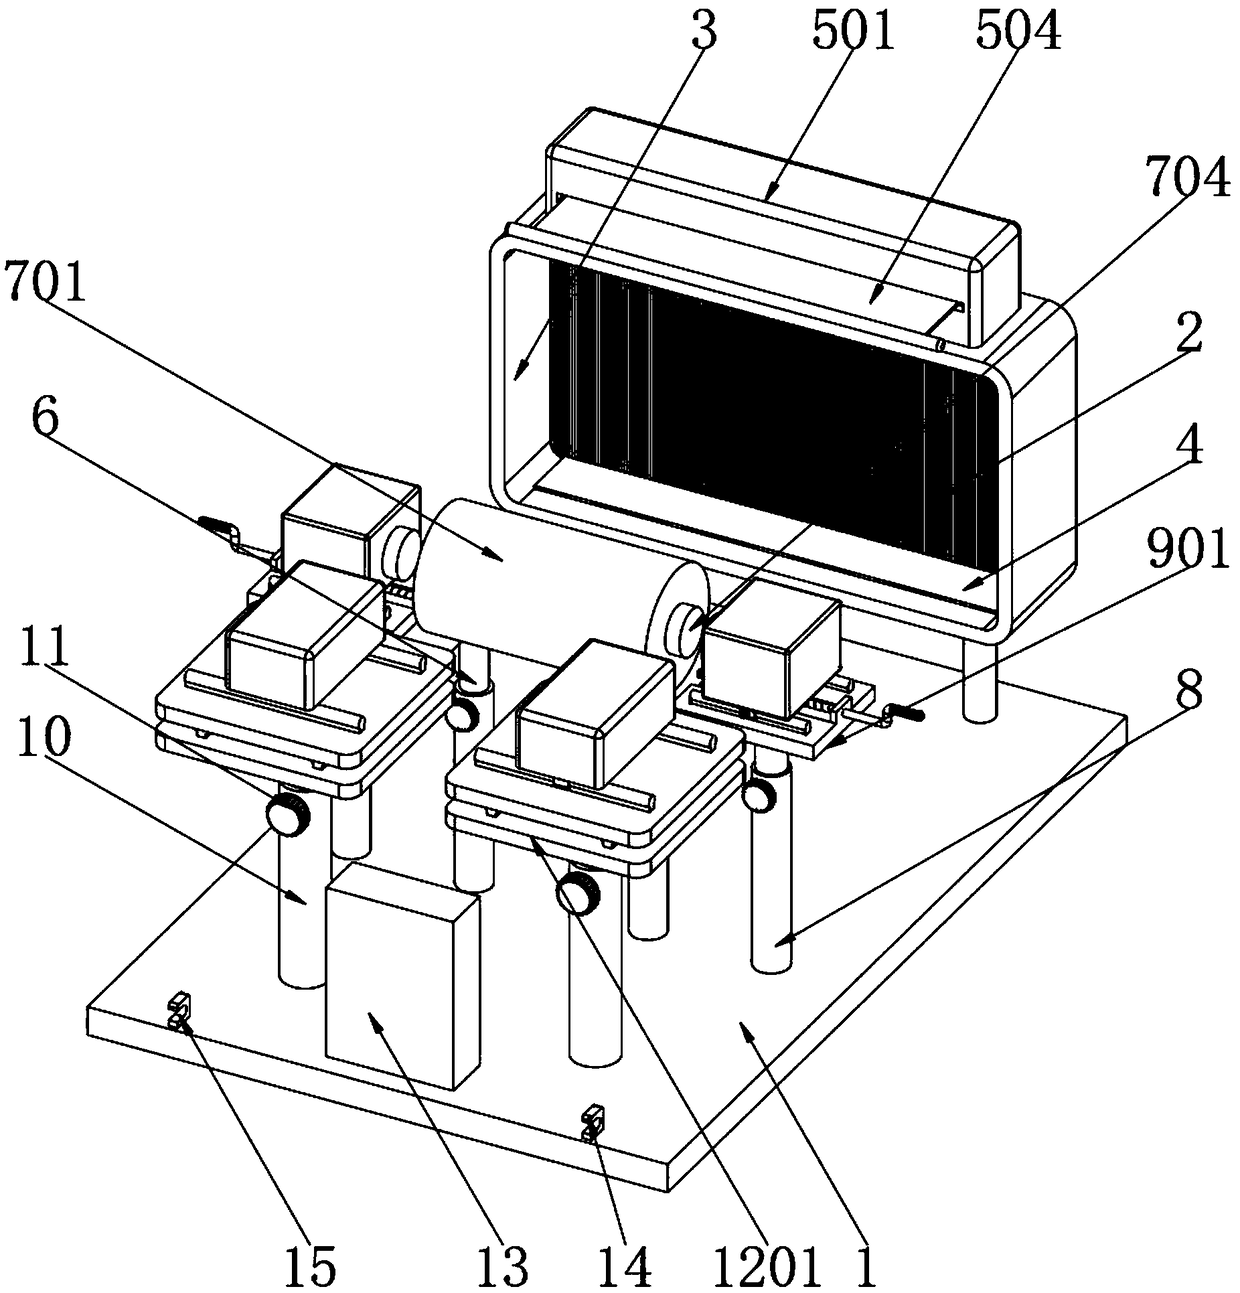 Device for measuring metal linear expansion coefficient based on pinhole imaging